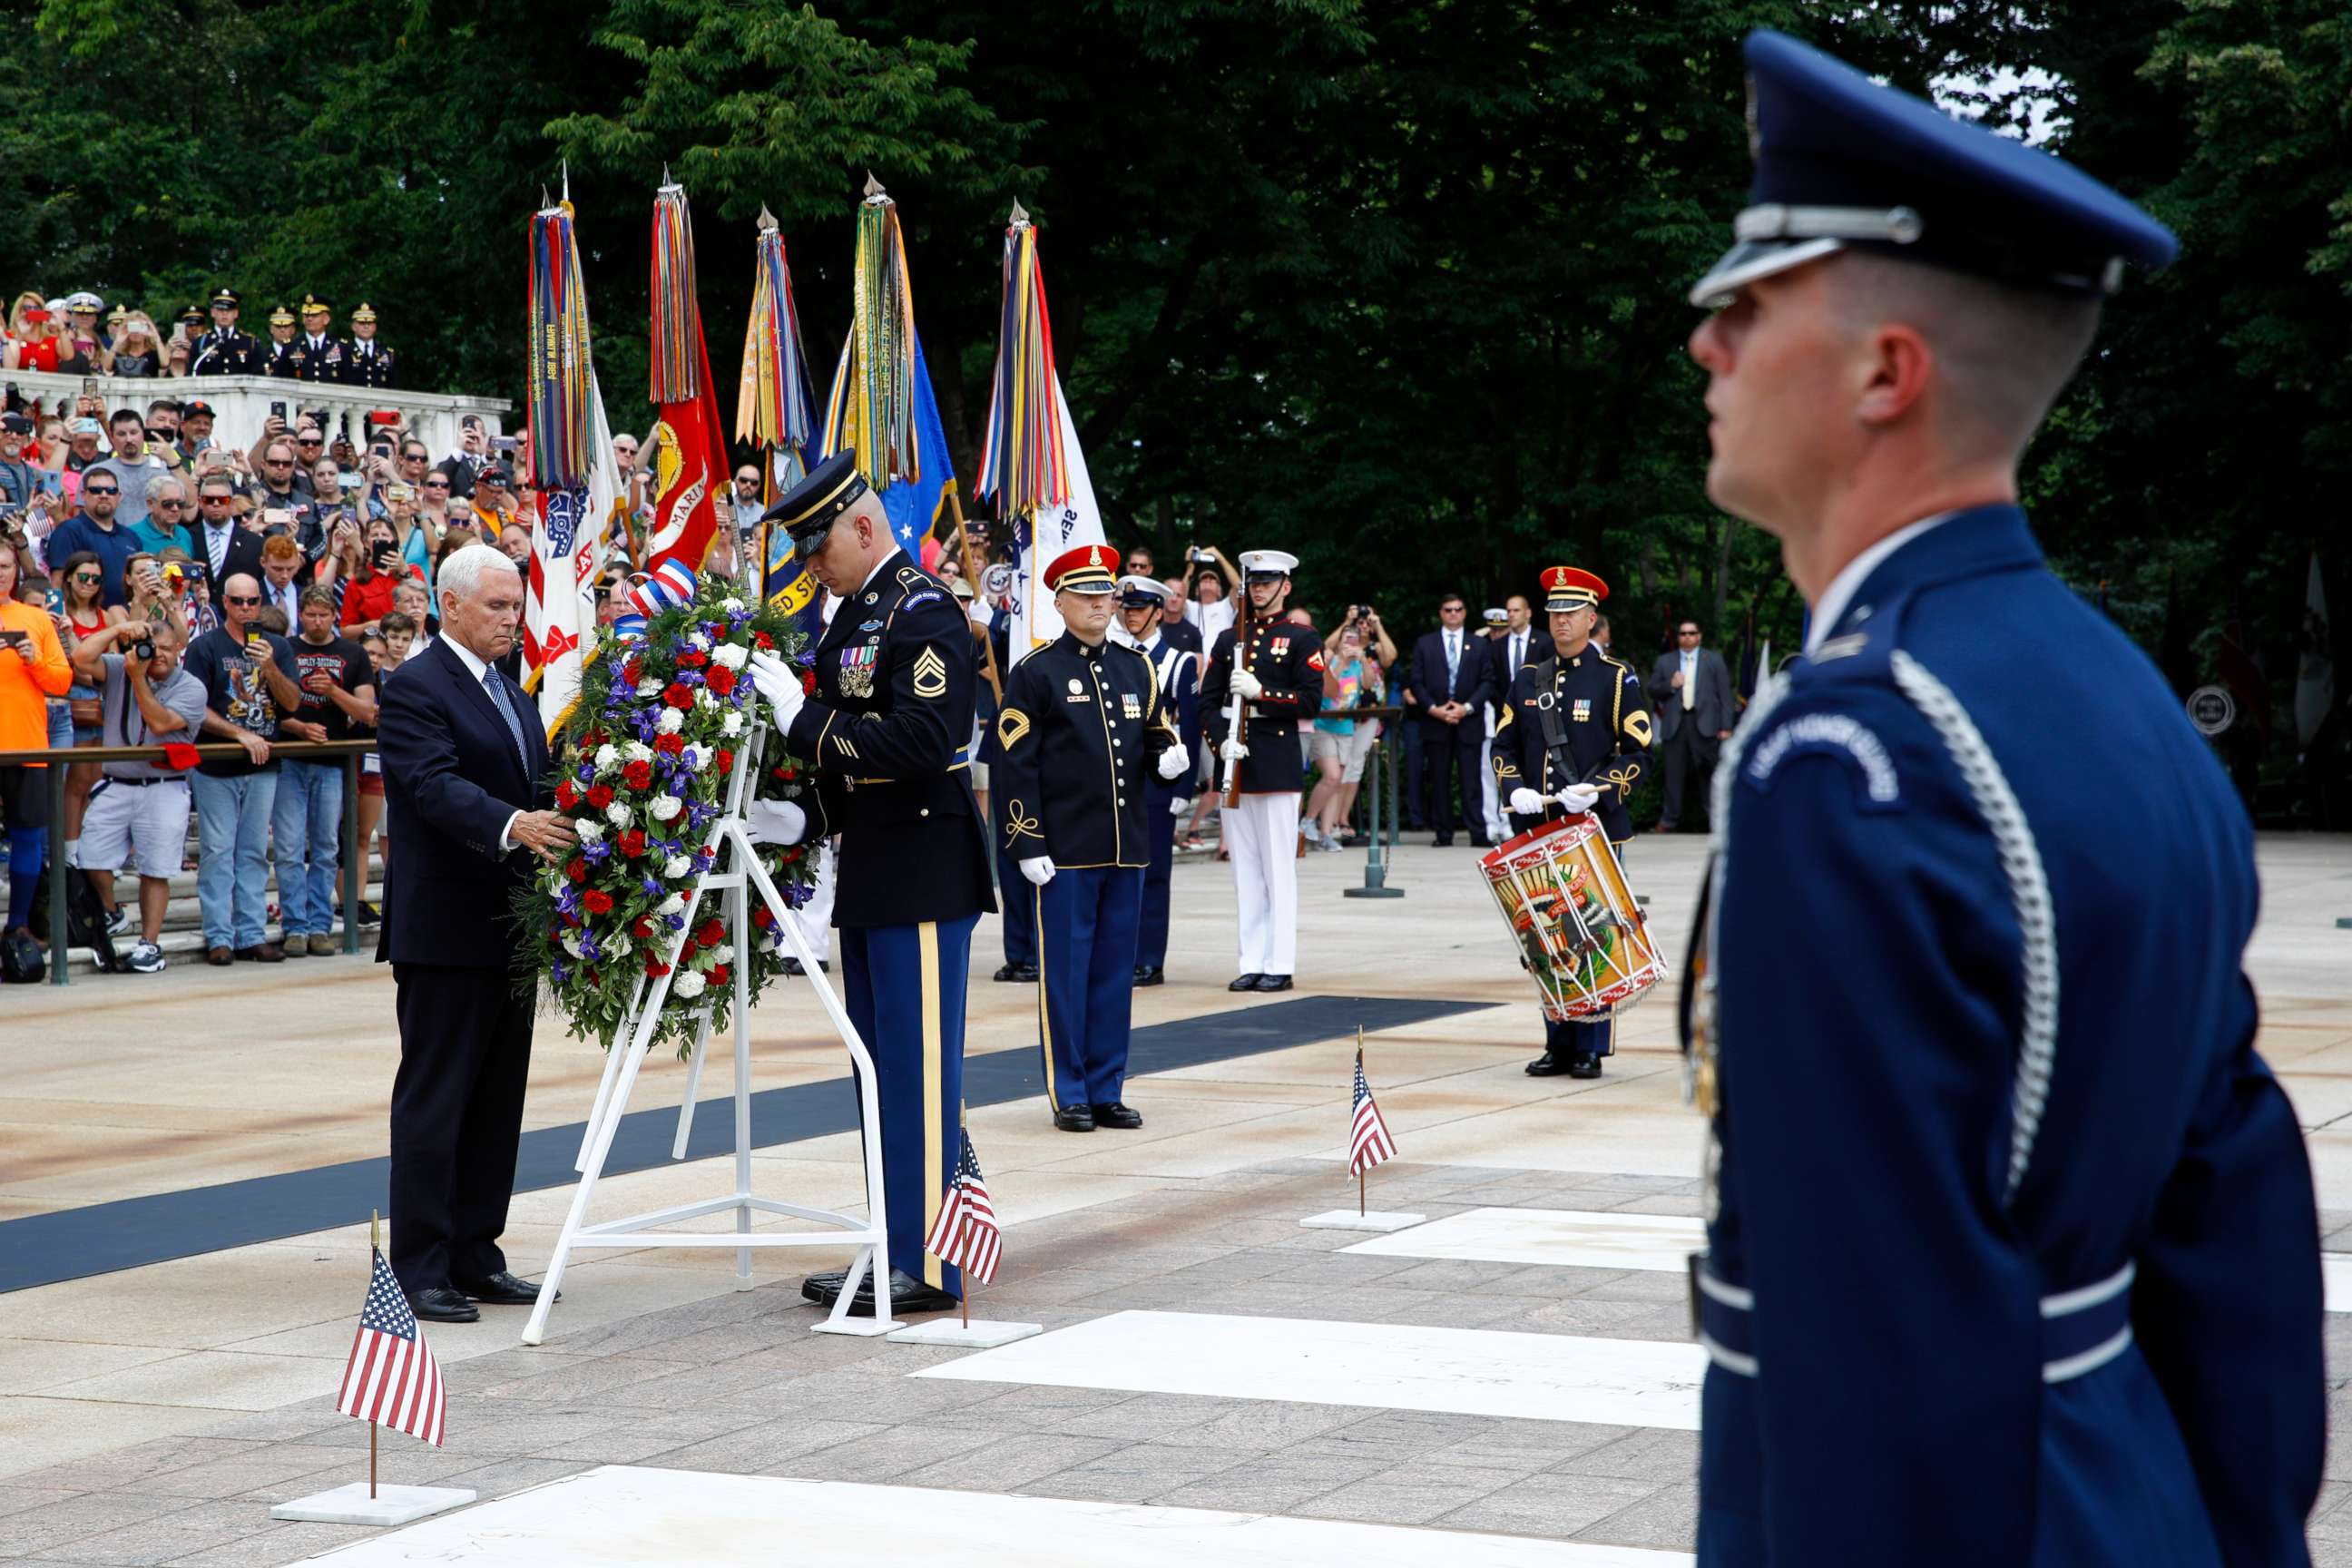 PHOTO: Vice President Mike Pence places a wreath in front of the Tomb of the Unknown Soldier in observance of Memorial Day, May 27, 2019.